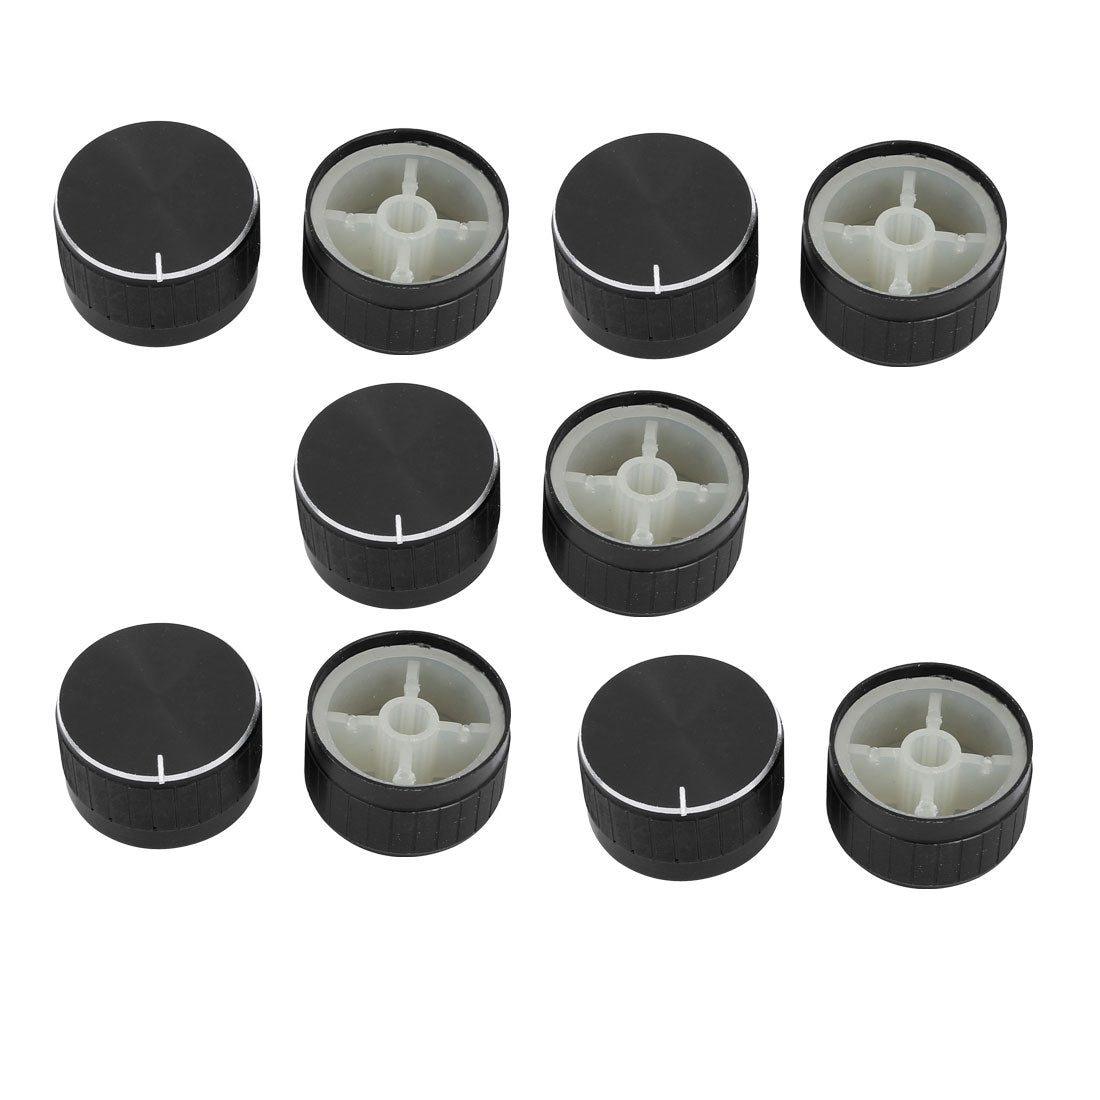 uxcell Uxcell 10pcs 6mm Hole Dia Round Potentiometer Lamp Dimmer Rotary Switch Knob Control Cap Black